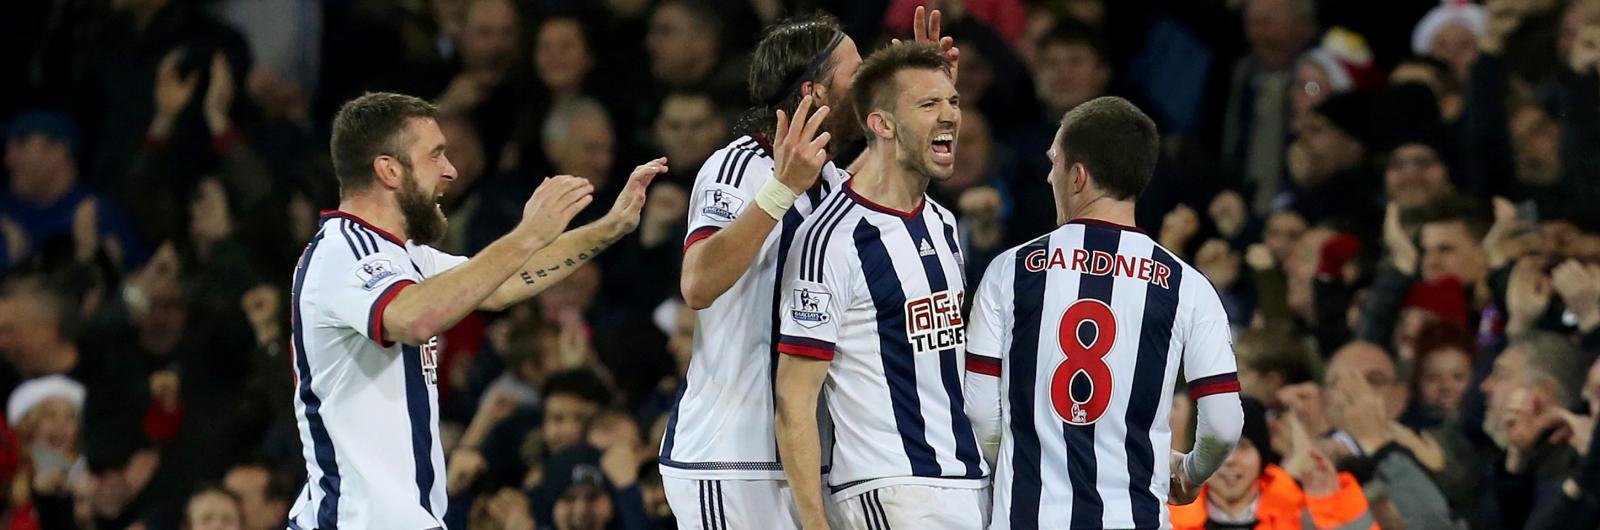 West Brom vs Crystal Palace: Preview & Prediction